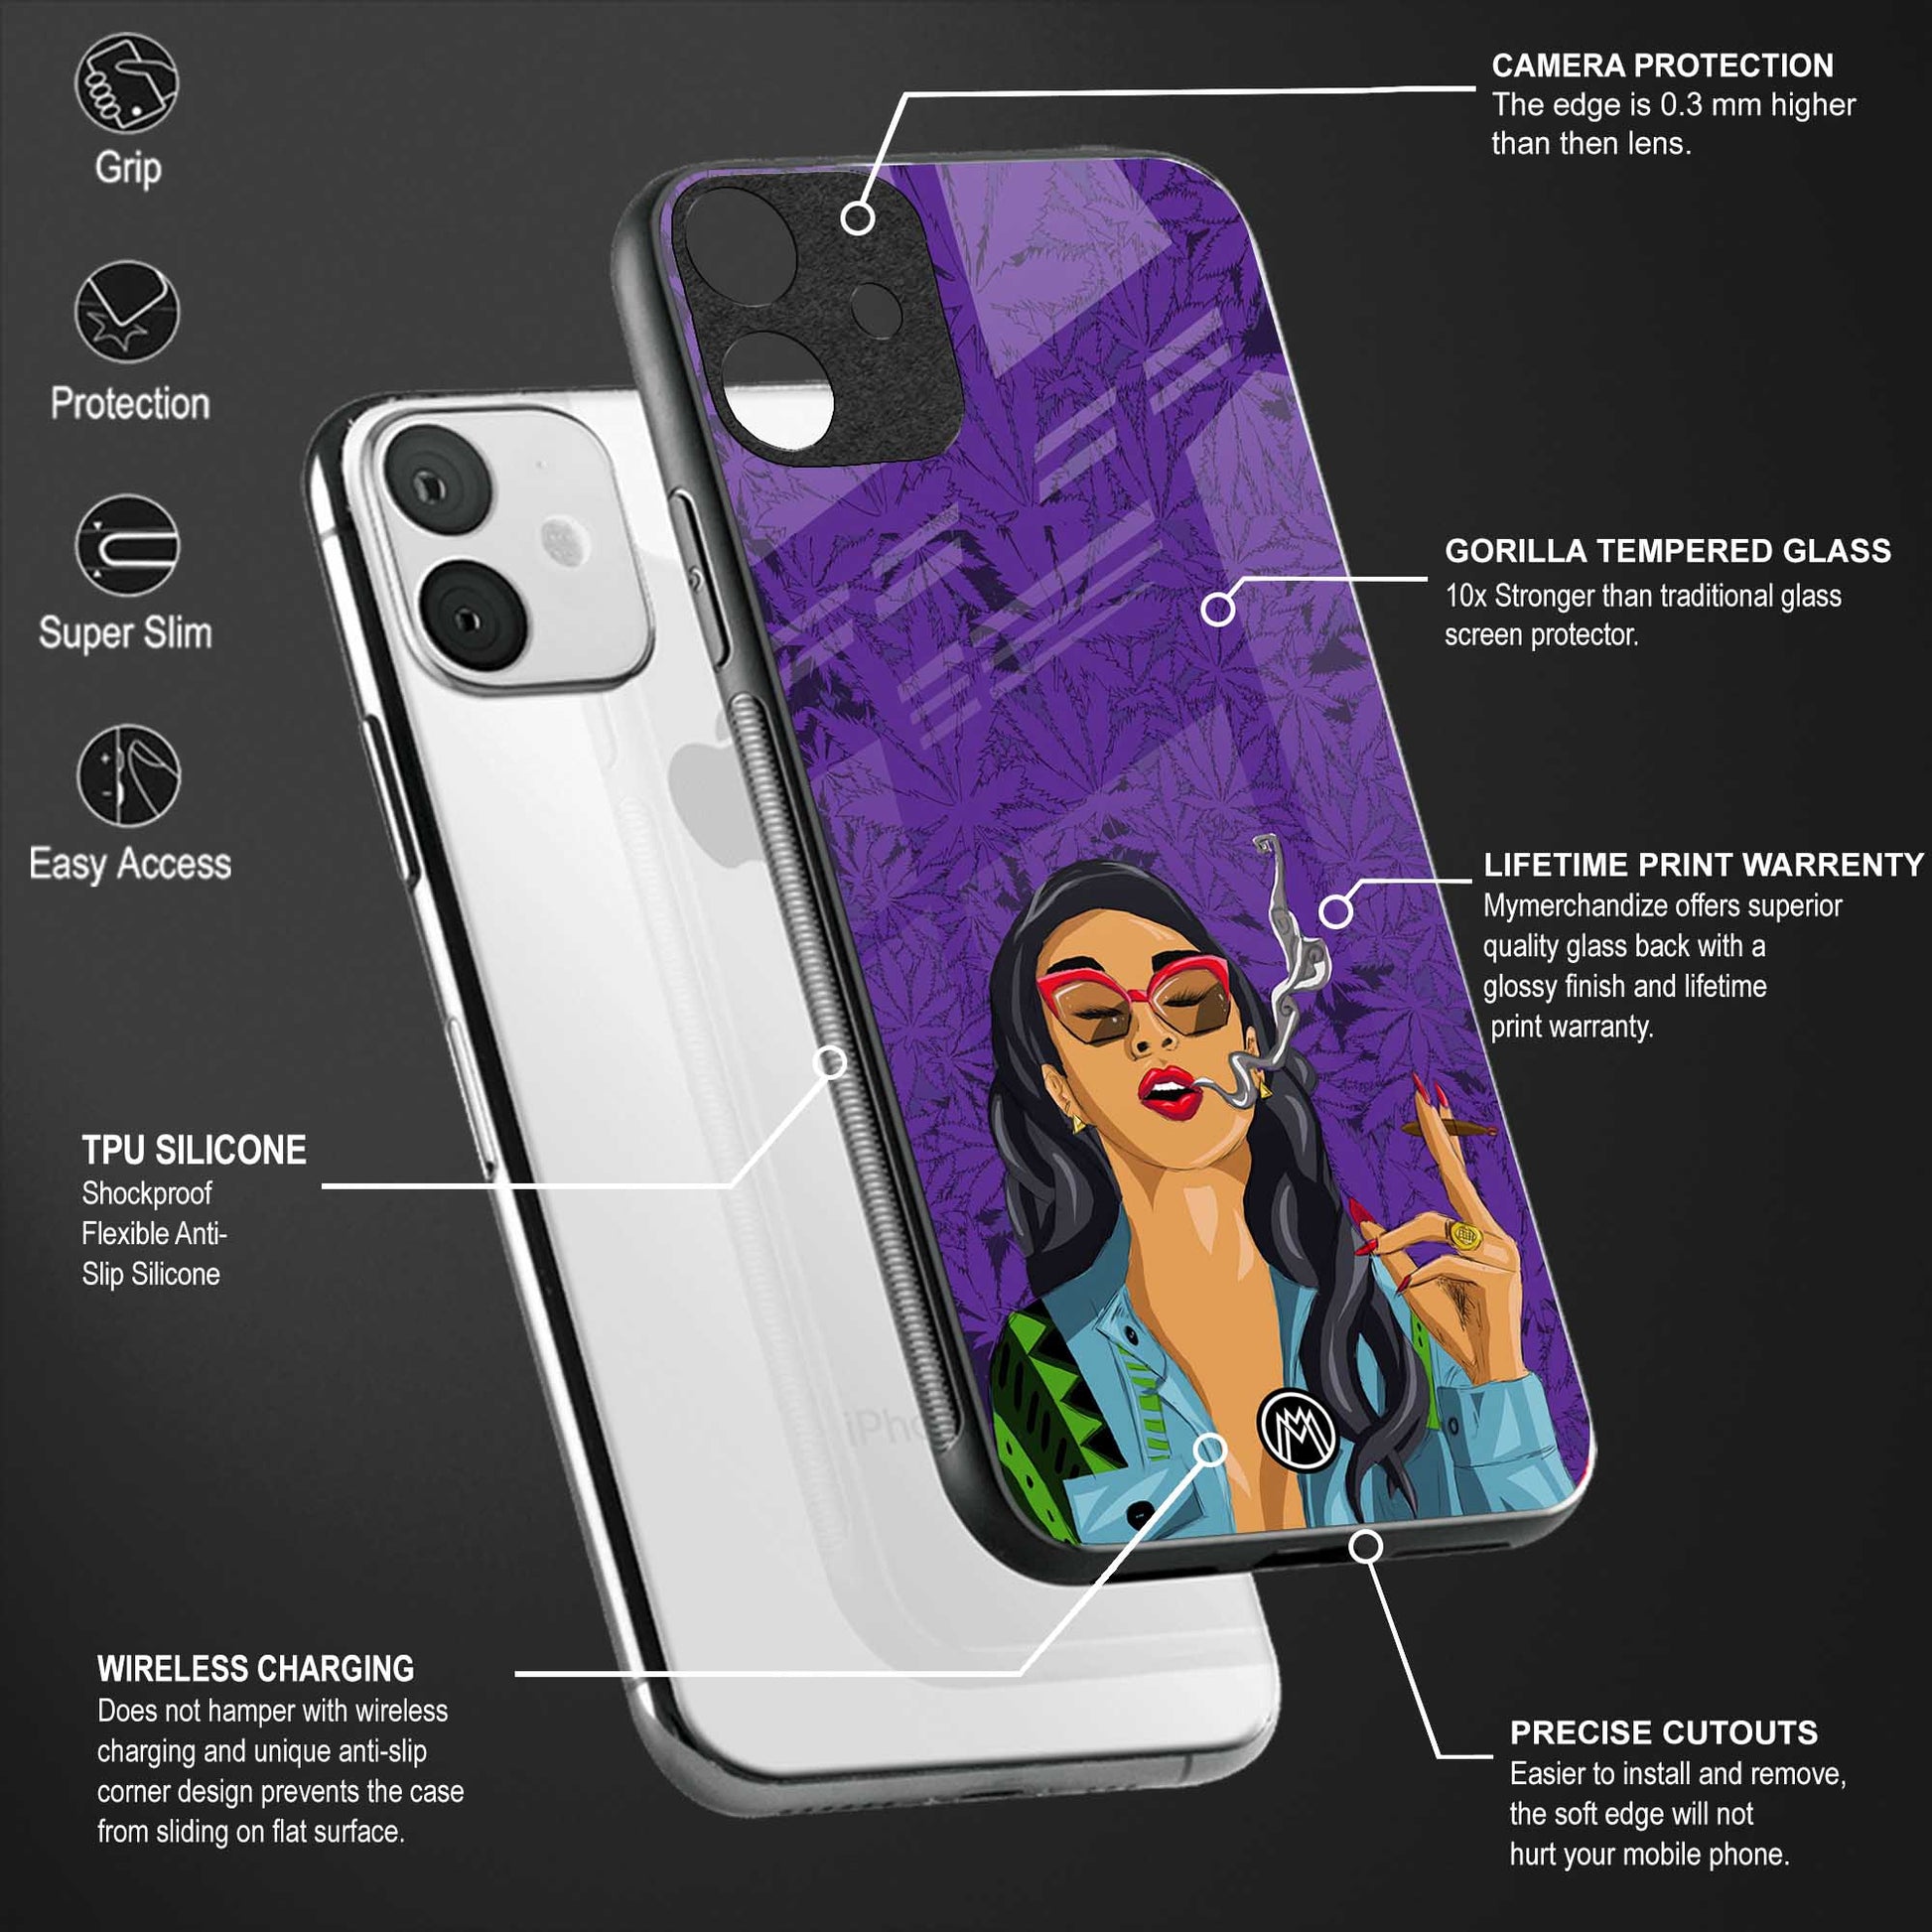 purple smoke back phone cover | glass case for vivo y73